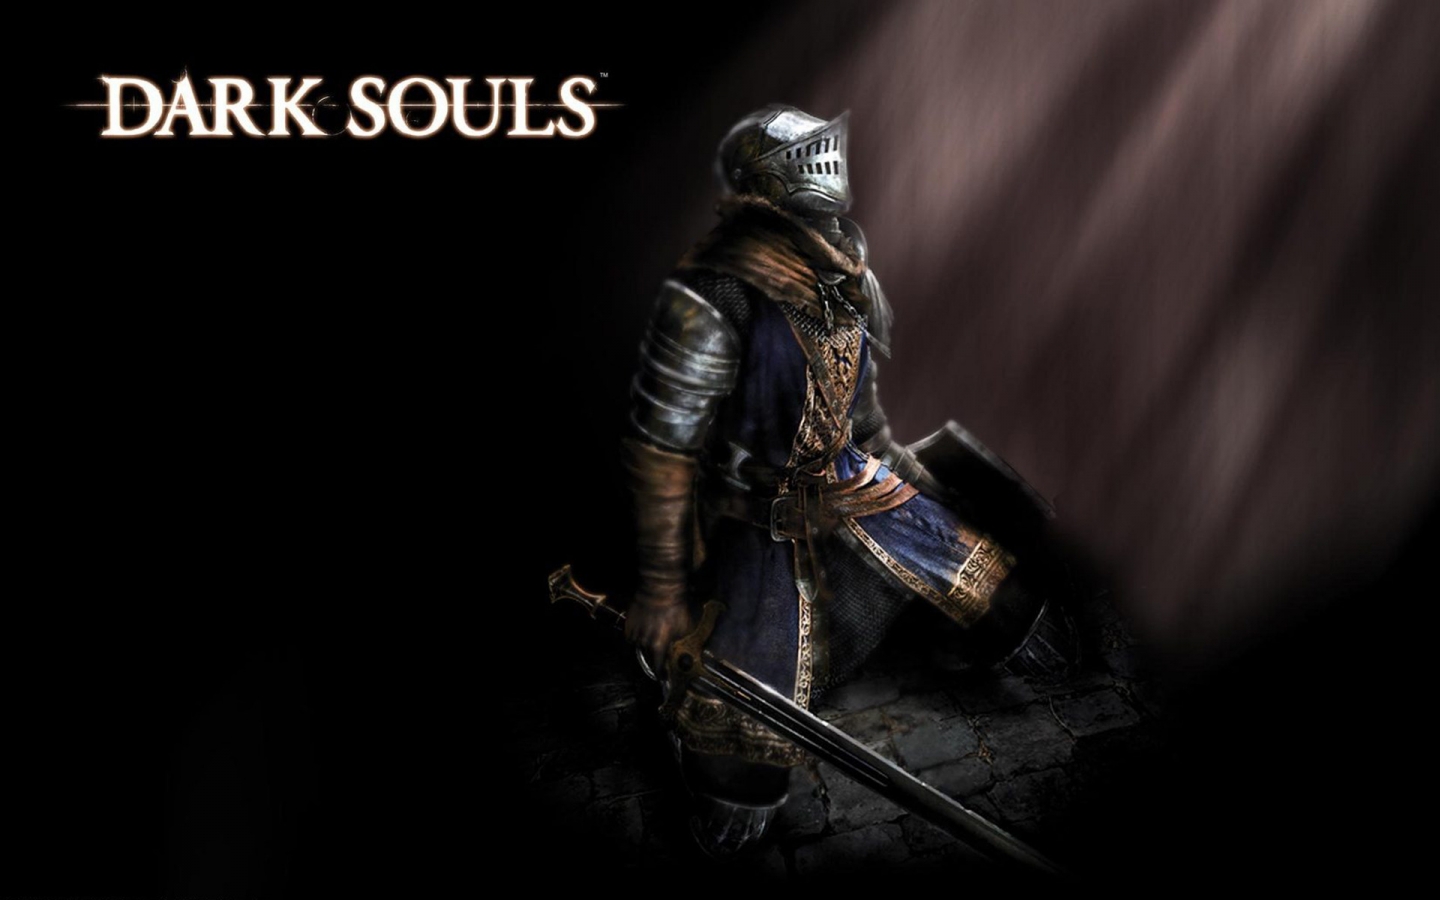 Dark Souls Character for 1440 x 900 widescreen resolution